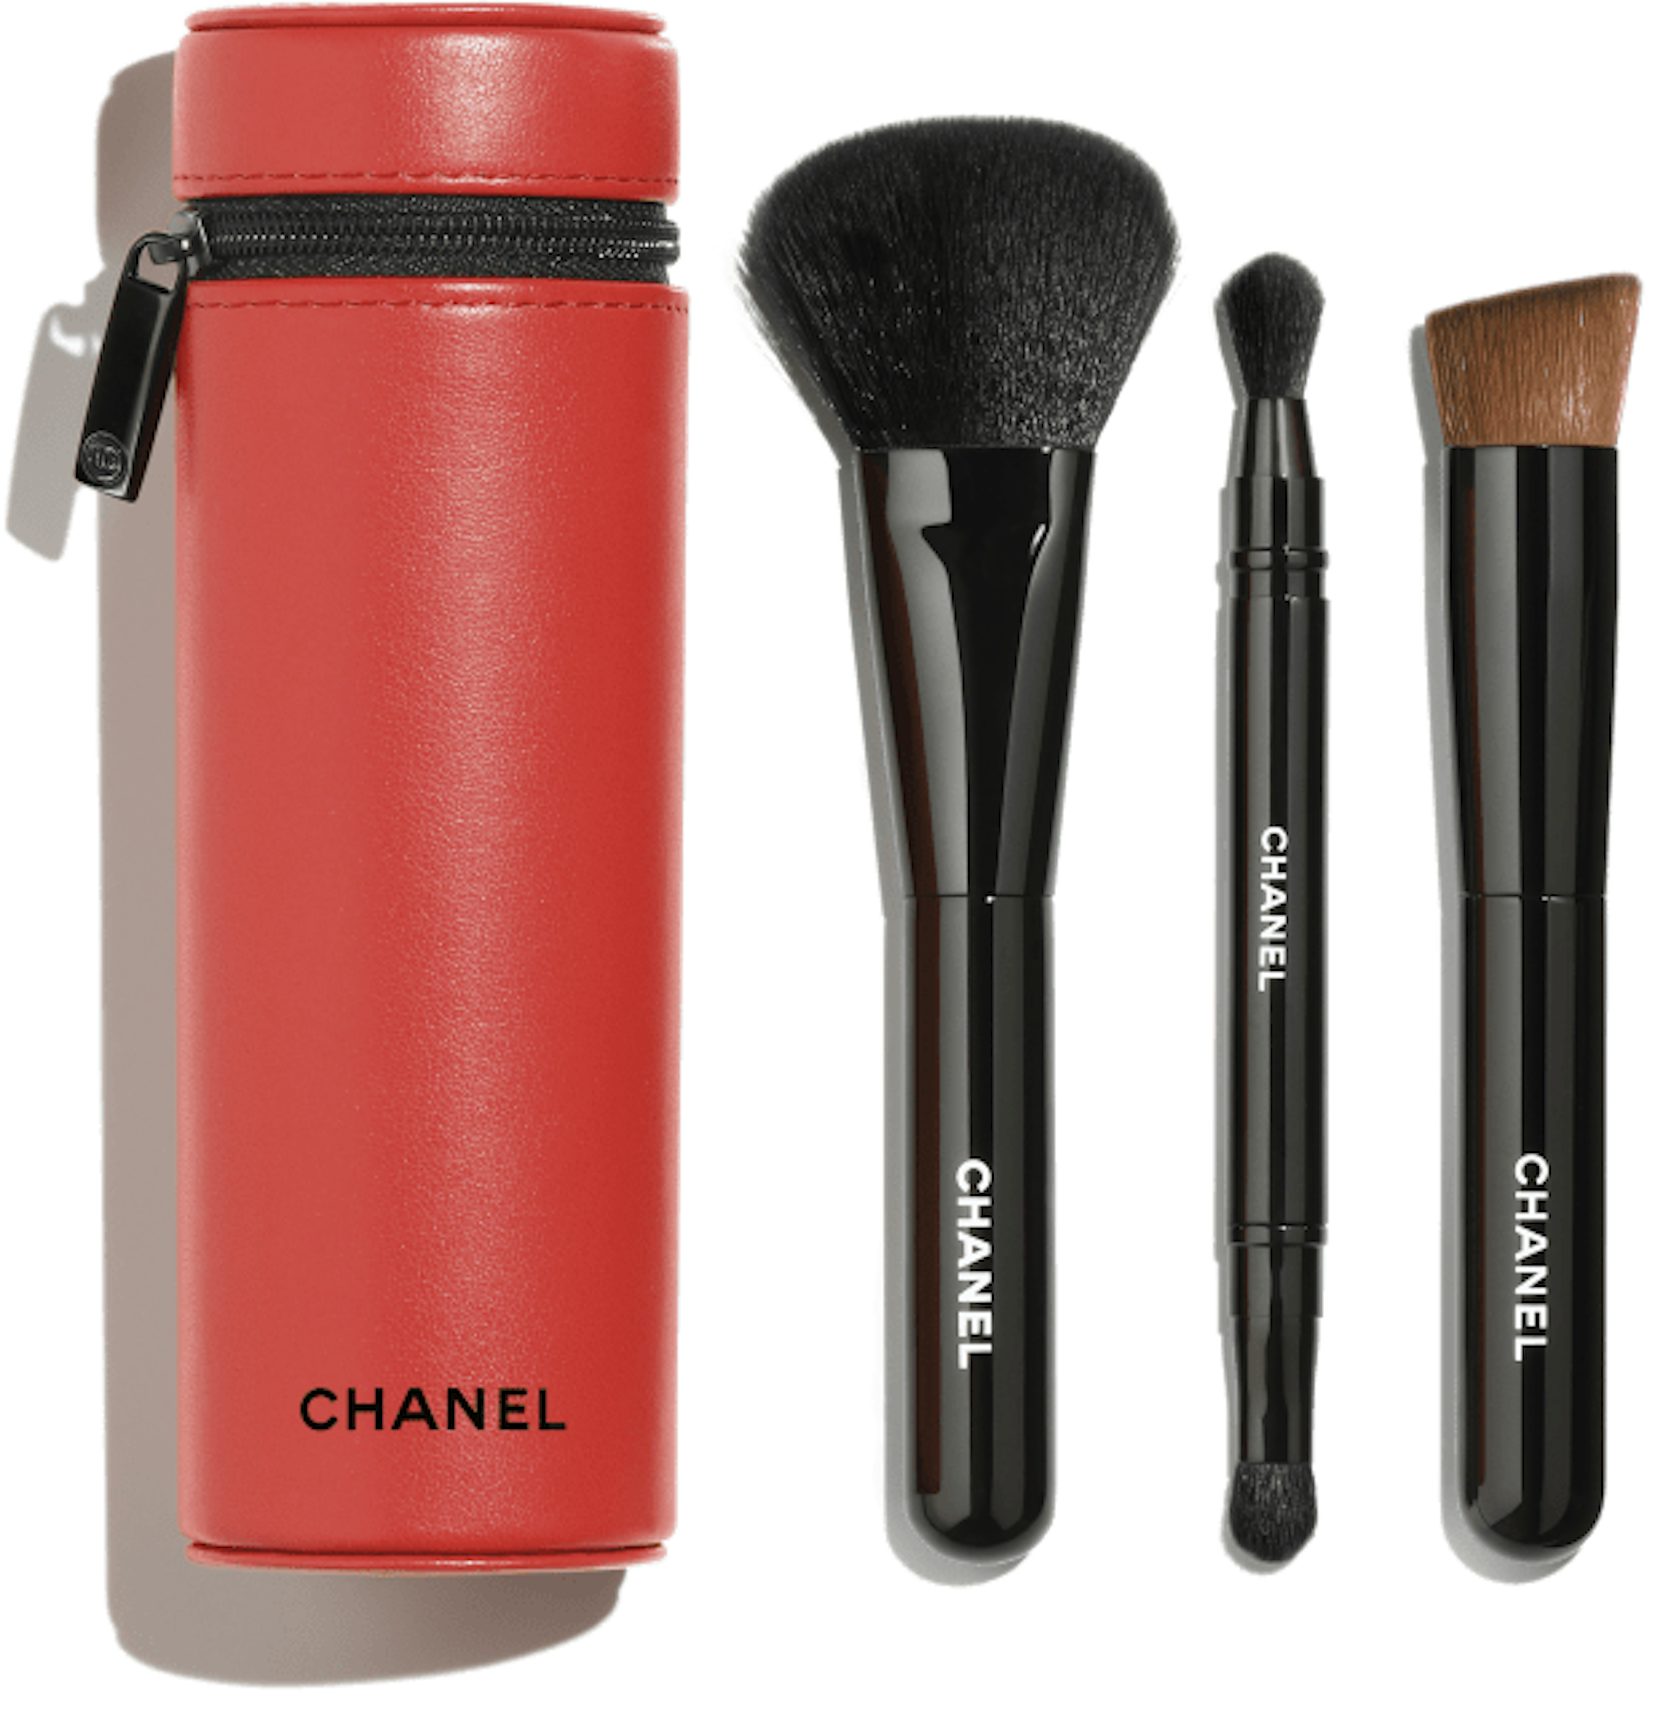 Chanel Codes Couleur Limited-Edition Collection of 3 Essential Brushes 121  - PREMIÈRE DAME in Leather Pouch / Synthetic Brushes - US